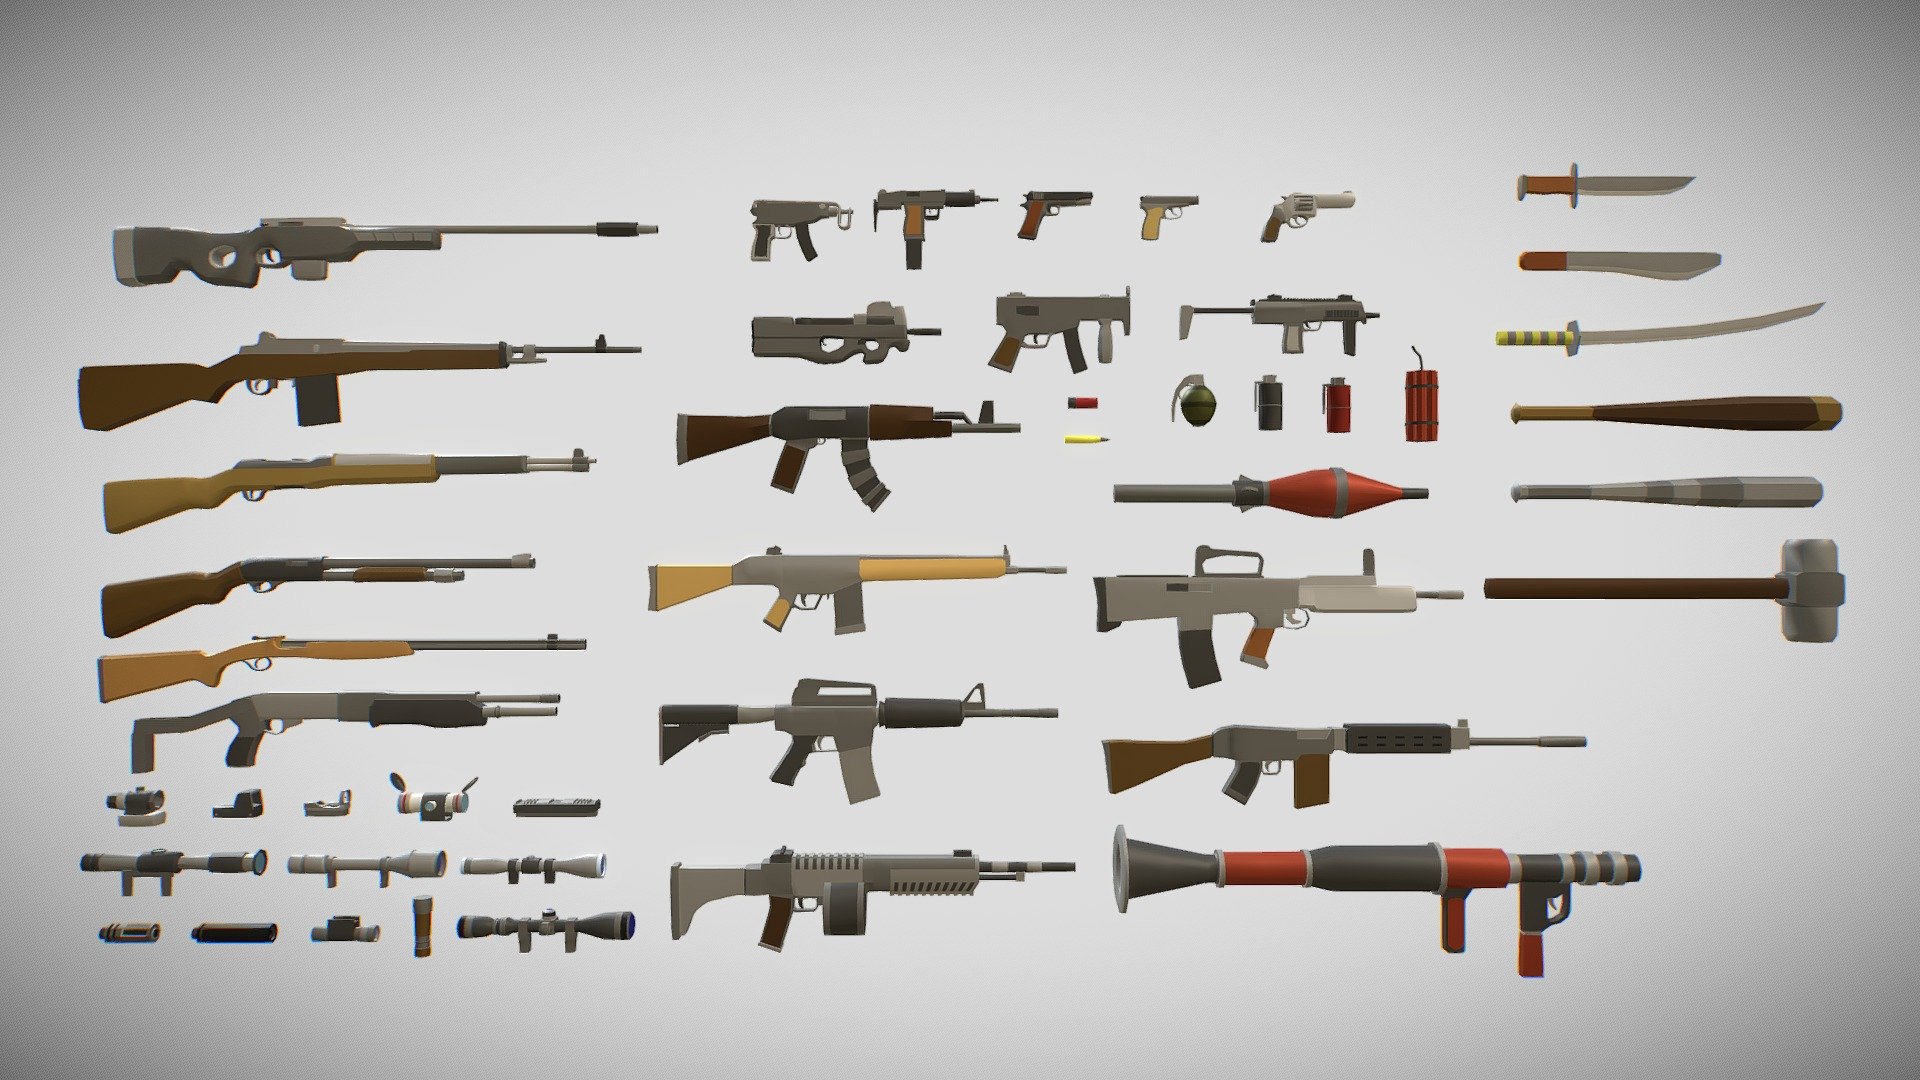 This package includes all individual models with clean topology in a zip file inside the package. The preview model appears to not have clean topology only because it was exported from Unity.

Polygonal Modern Weapons is a high quality asset package for your polygonal or prototype game ideas!




The package uses a single atlas texture that has base colors for all the models. This ensures fantastic visuals and unparalleled performance.

Includes 46 weapon assets! These include melee weapons, explosives, shotguns, rifles, machine guns, sub-machine guns, pistols, attachments, launchers, and more!

Support email : alignedgames@mailbox.co.za

Aligned Games website : https://alignedgames.com/ - Polygonal Modern Weapons Asset Package - Buy Royalty Free 3D model by Aligned Games (@Johannesnienaber) 3d model